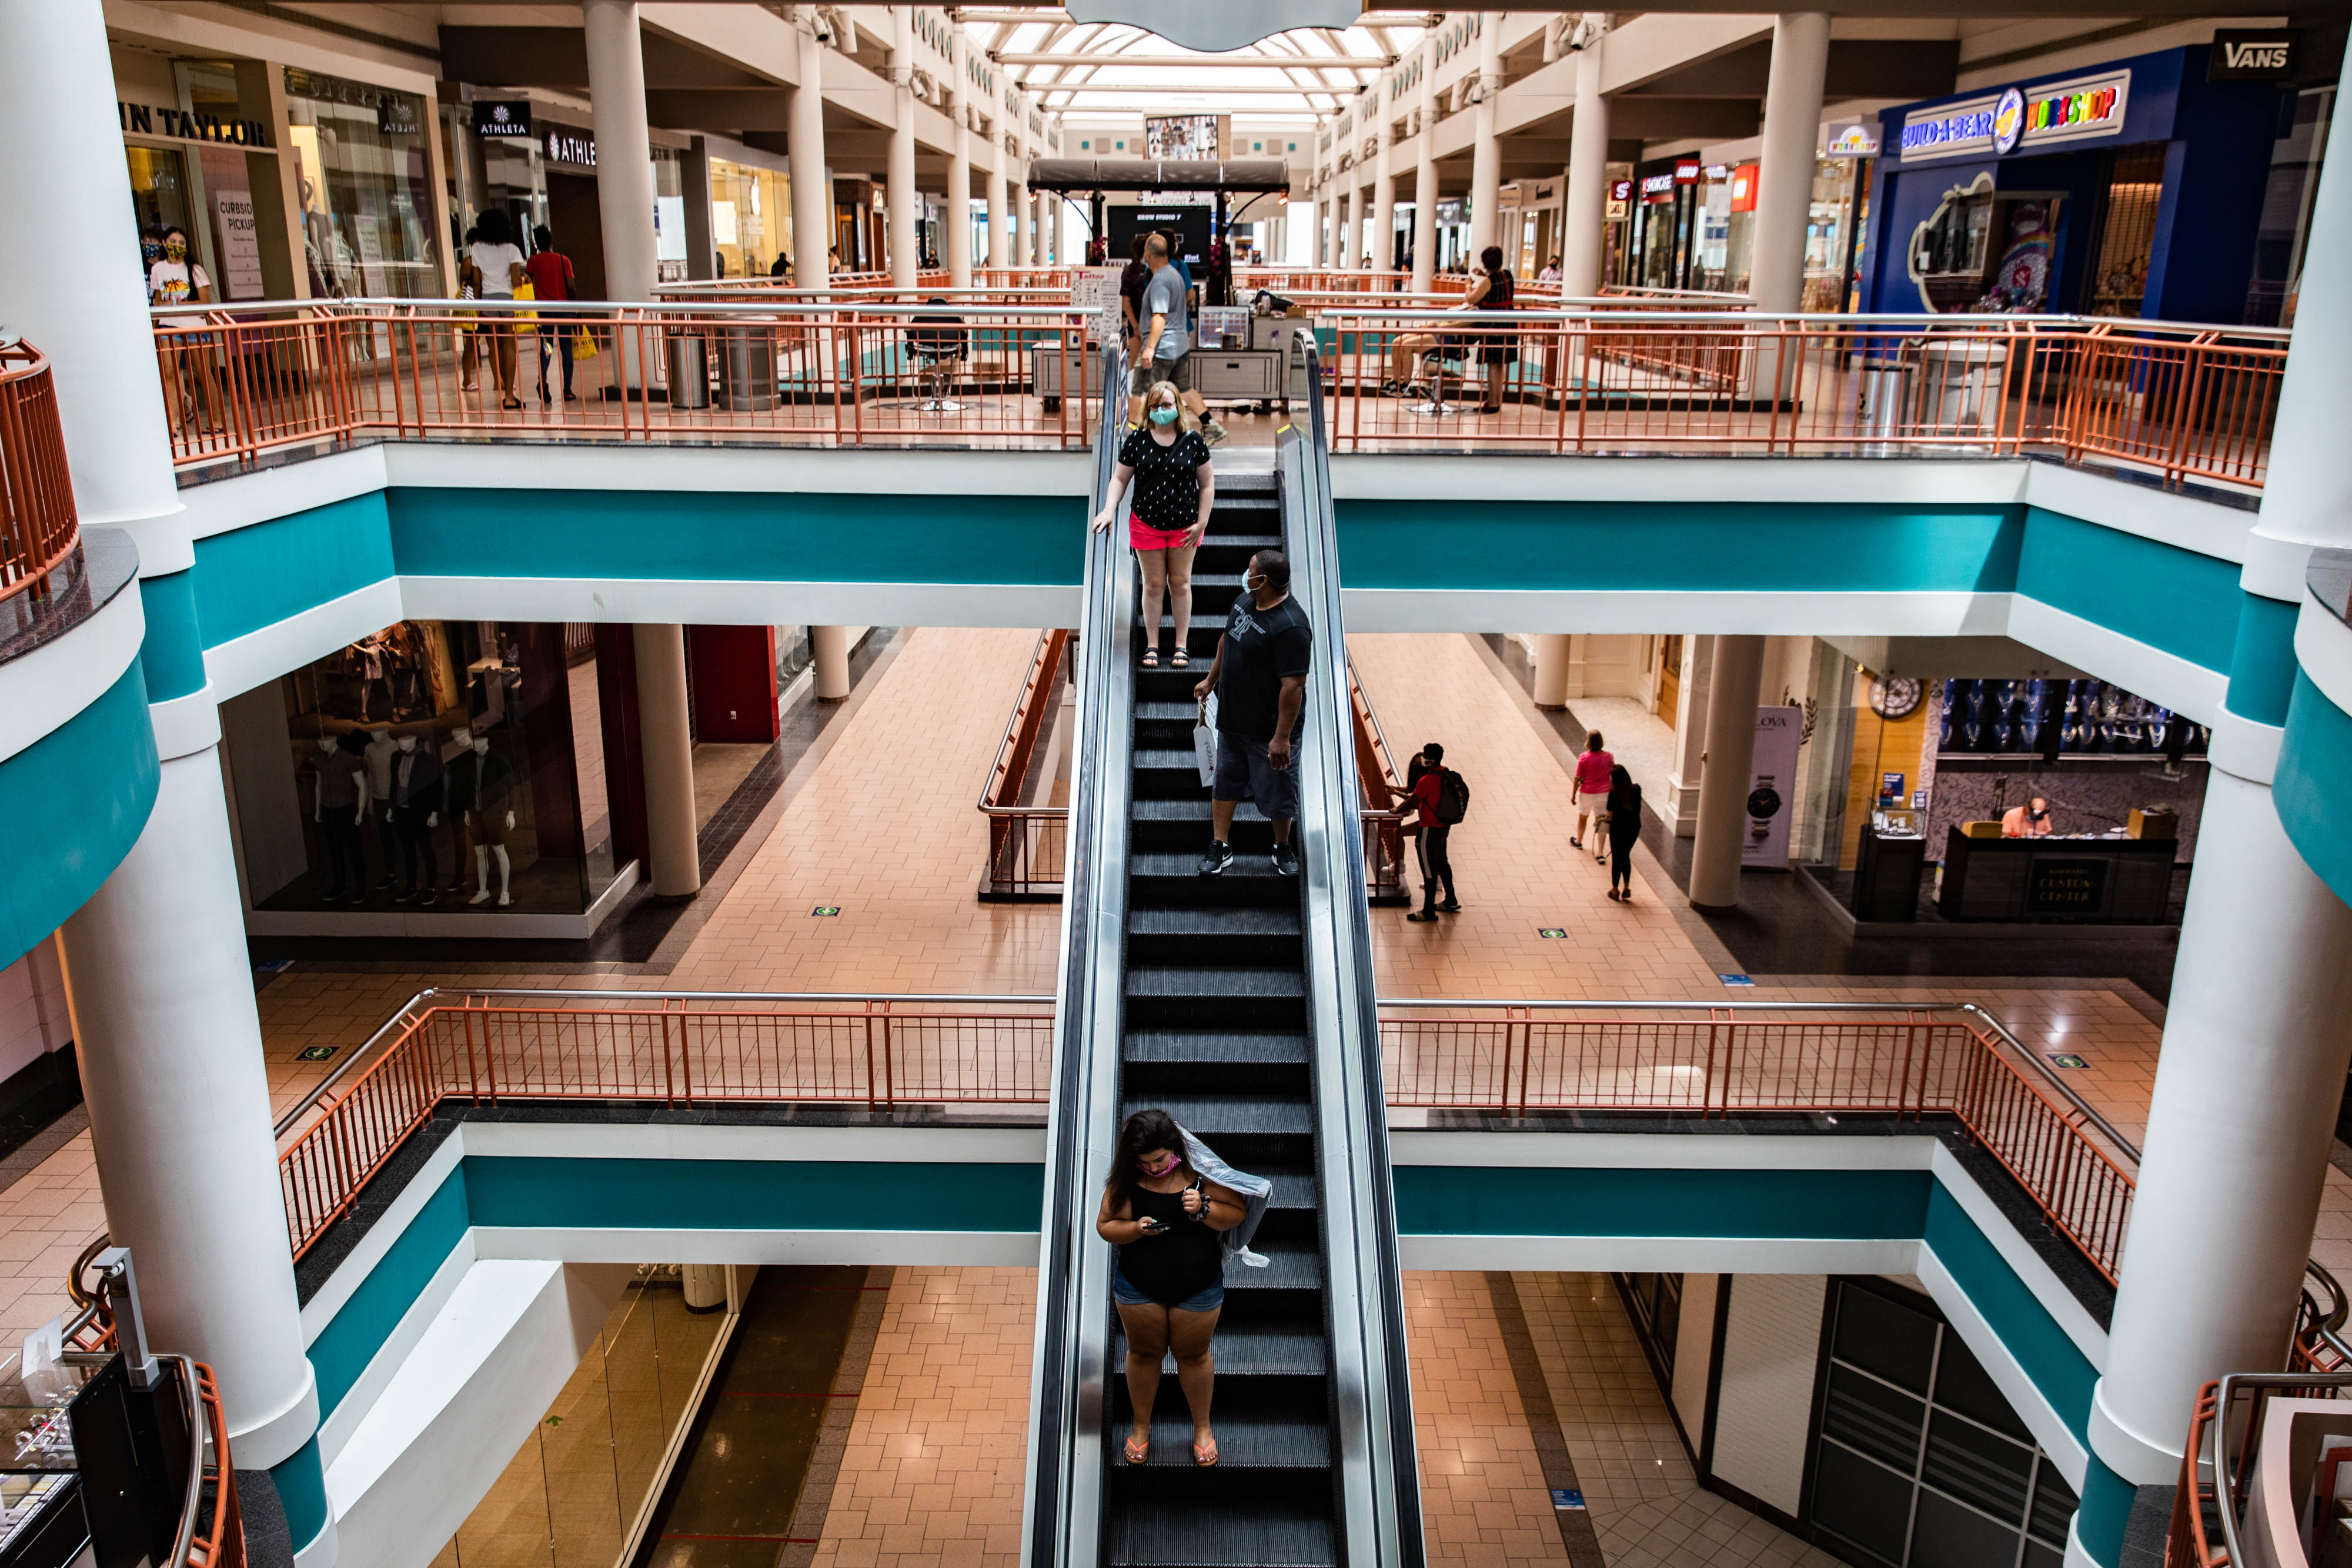 How The Gardens Mall is riding the fickle winds of retail